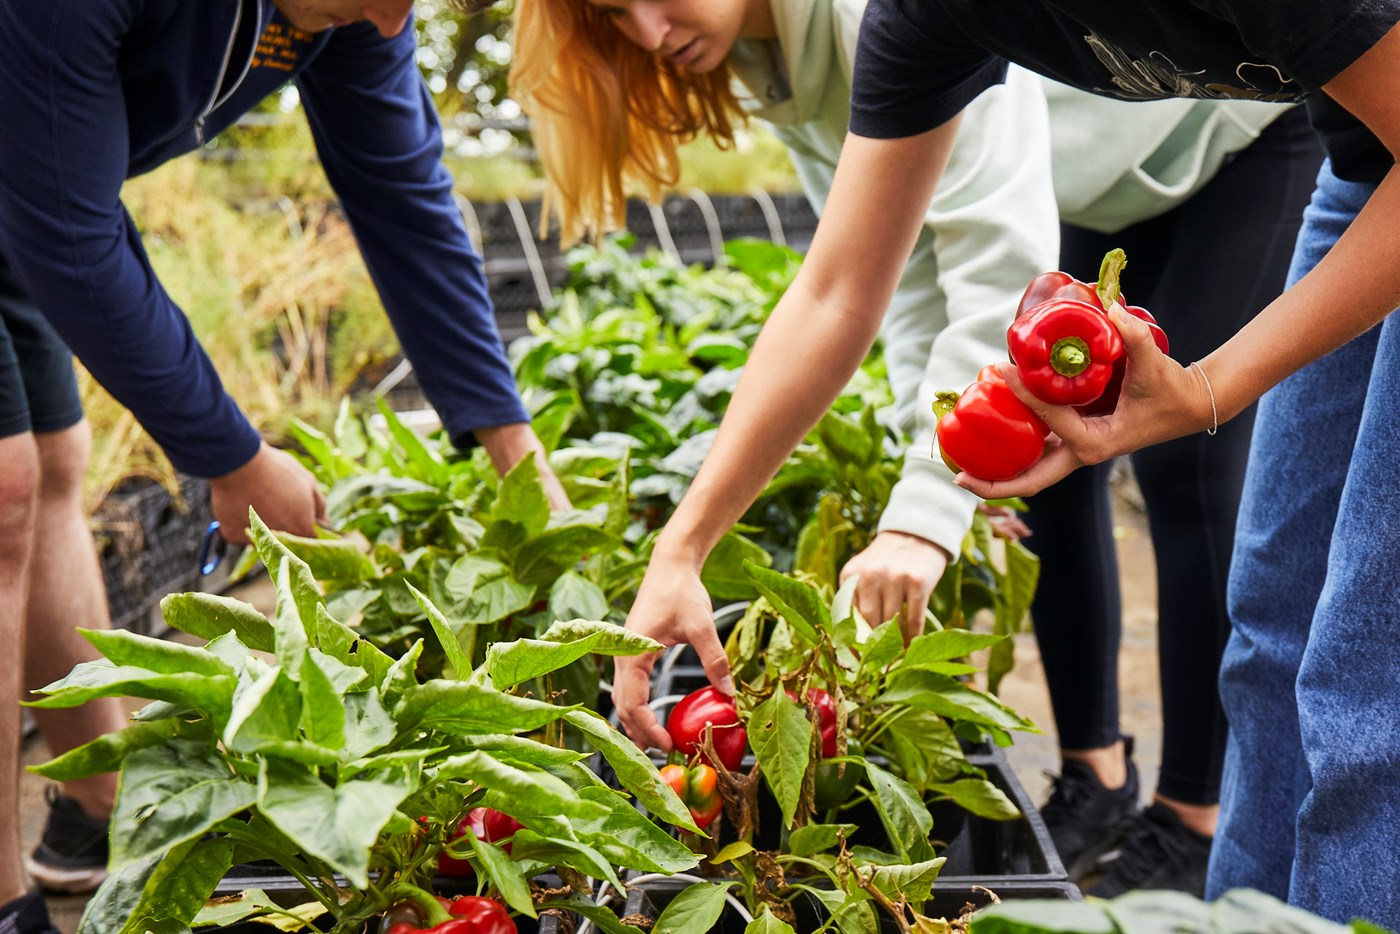 Three individuals harvest red bell peppers from a UMass Lowell Rooftop Garden.